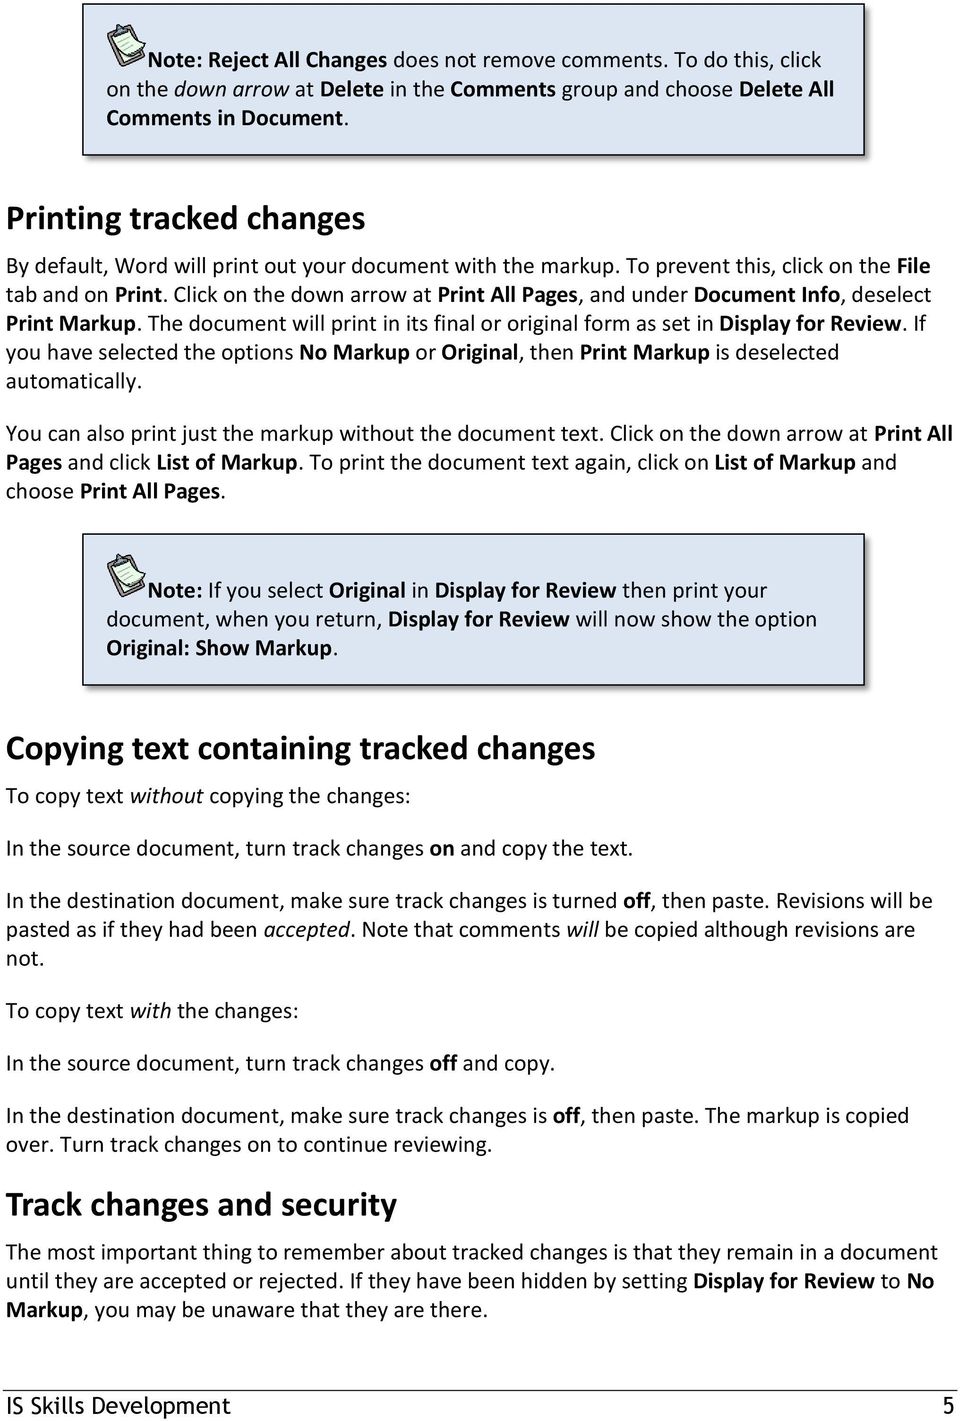 Click on the down arrow at Print All Pages, and under Document Info, deselect Print Markup. The document will print in its final or original form as set in Display for Review.